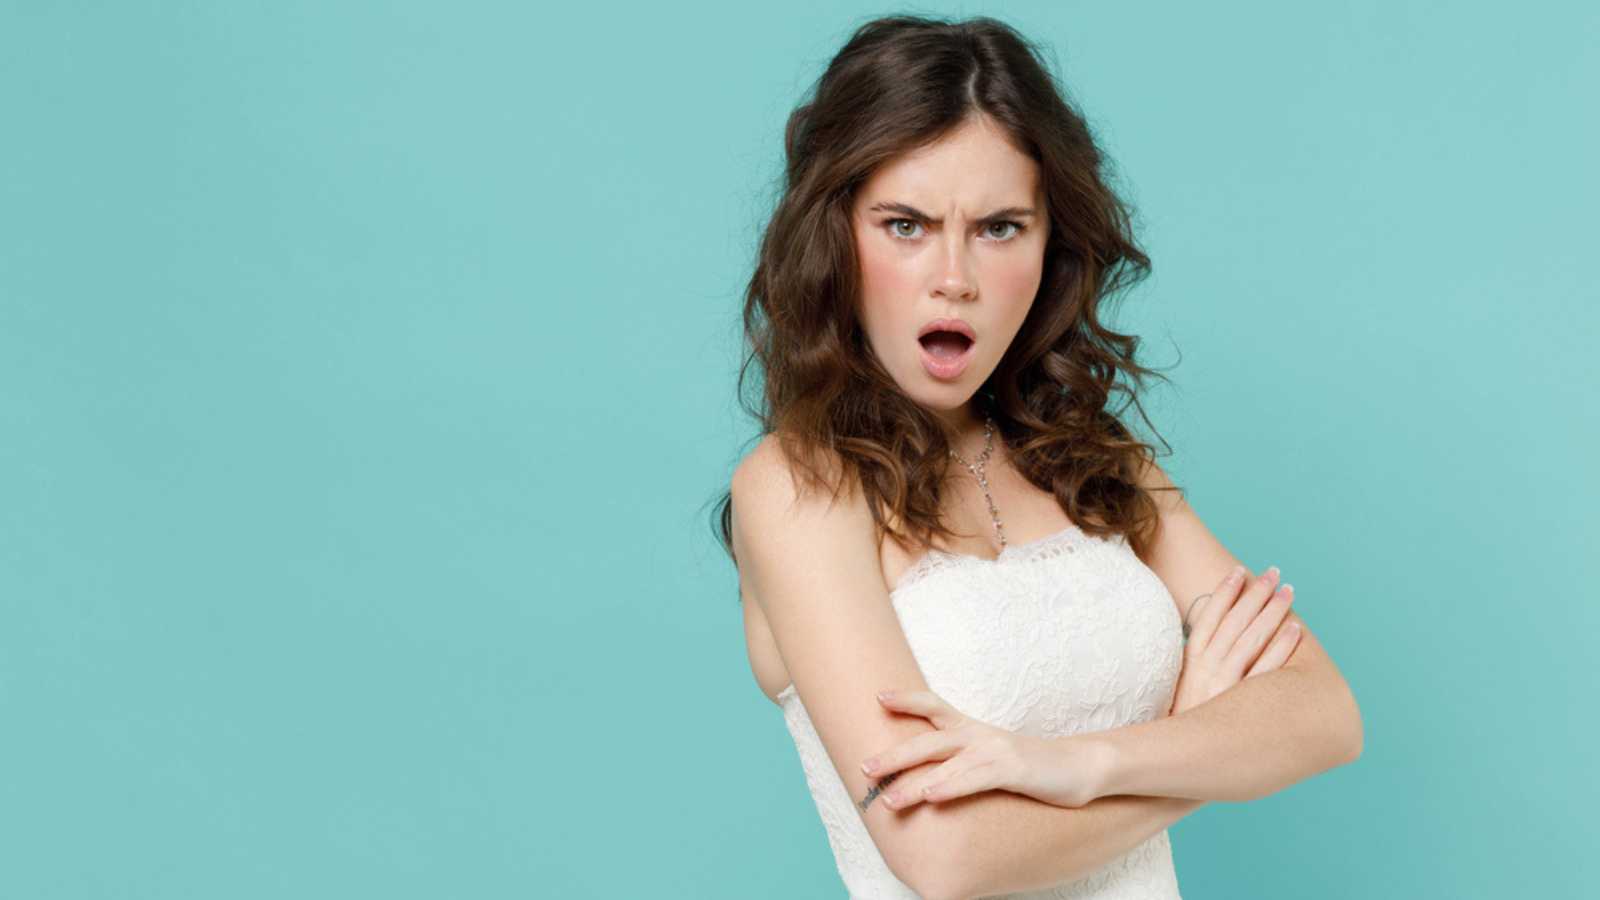 Woman giving angry look with folded hands reaction